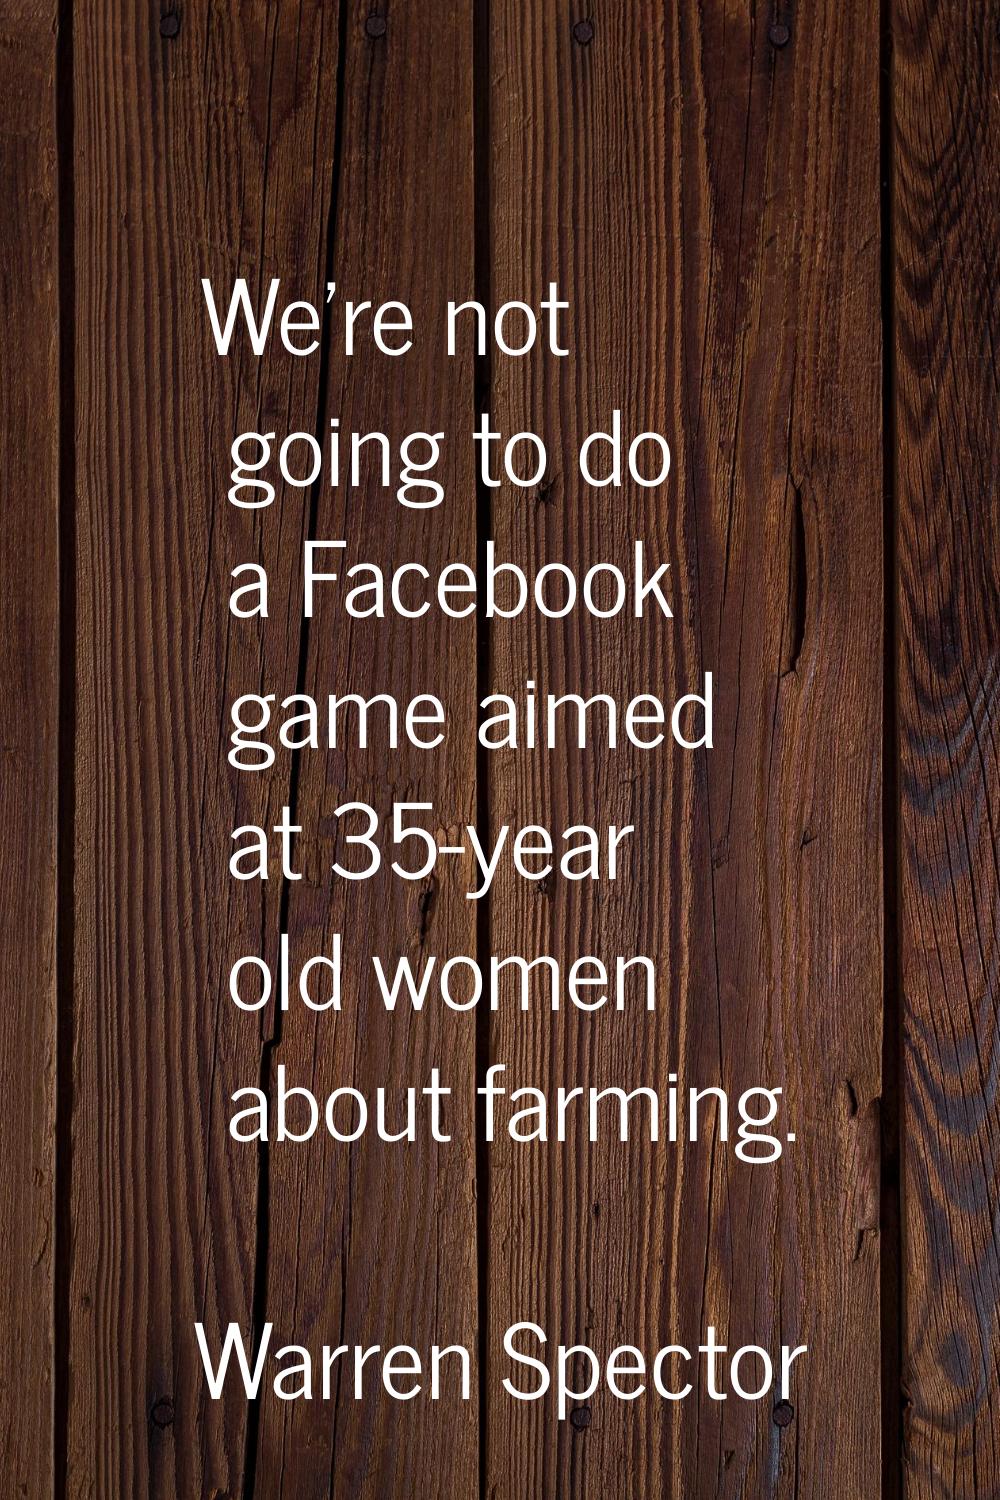 We're not going to do a Facebook game aimed at 35-year old women about farming.